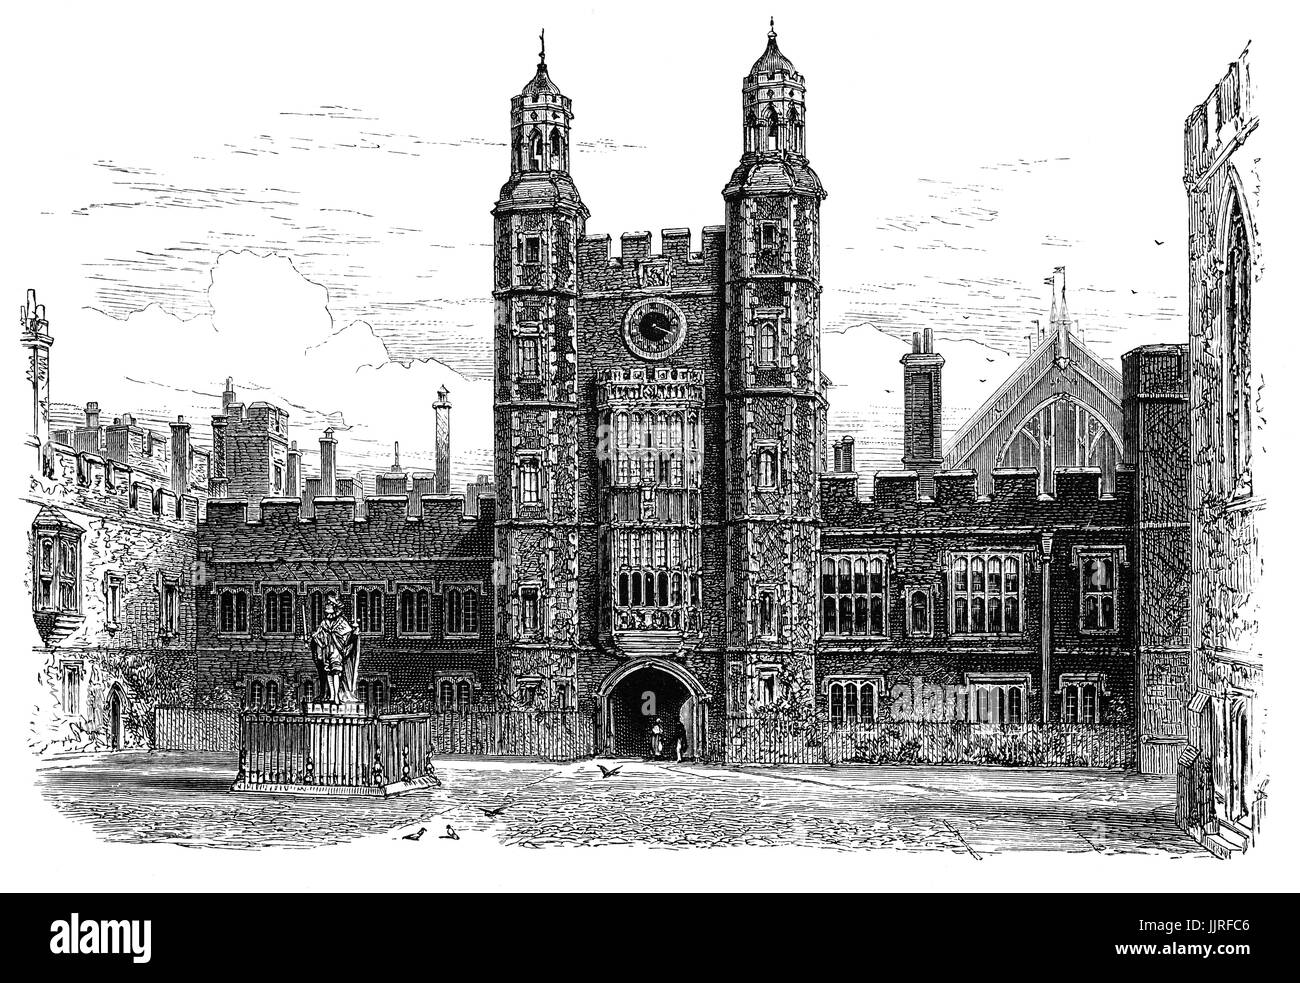 1870: The Quadrangle at  Eton College, an English independent boarding school for boys founded in 1440 by King Henry VI as 'The King's College of Our Lady of Eton besides Wyndsor', Eton, Berkshire, near Windsor, England. Stock Photo